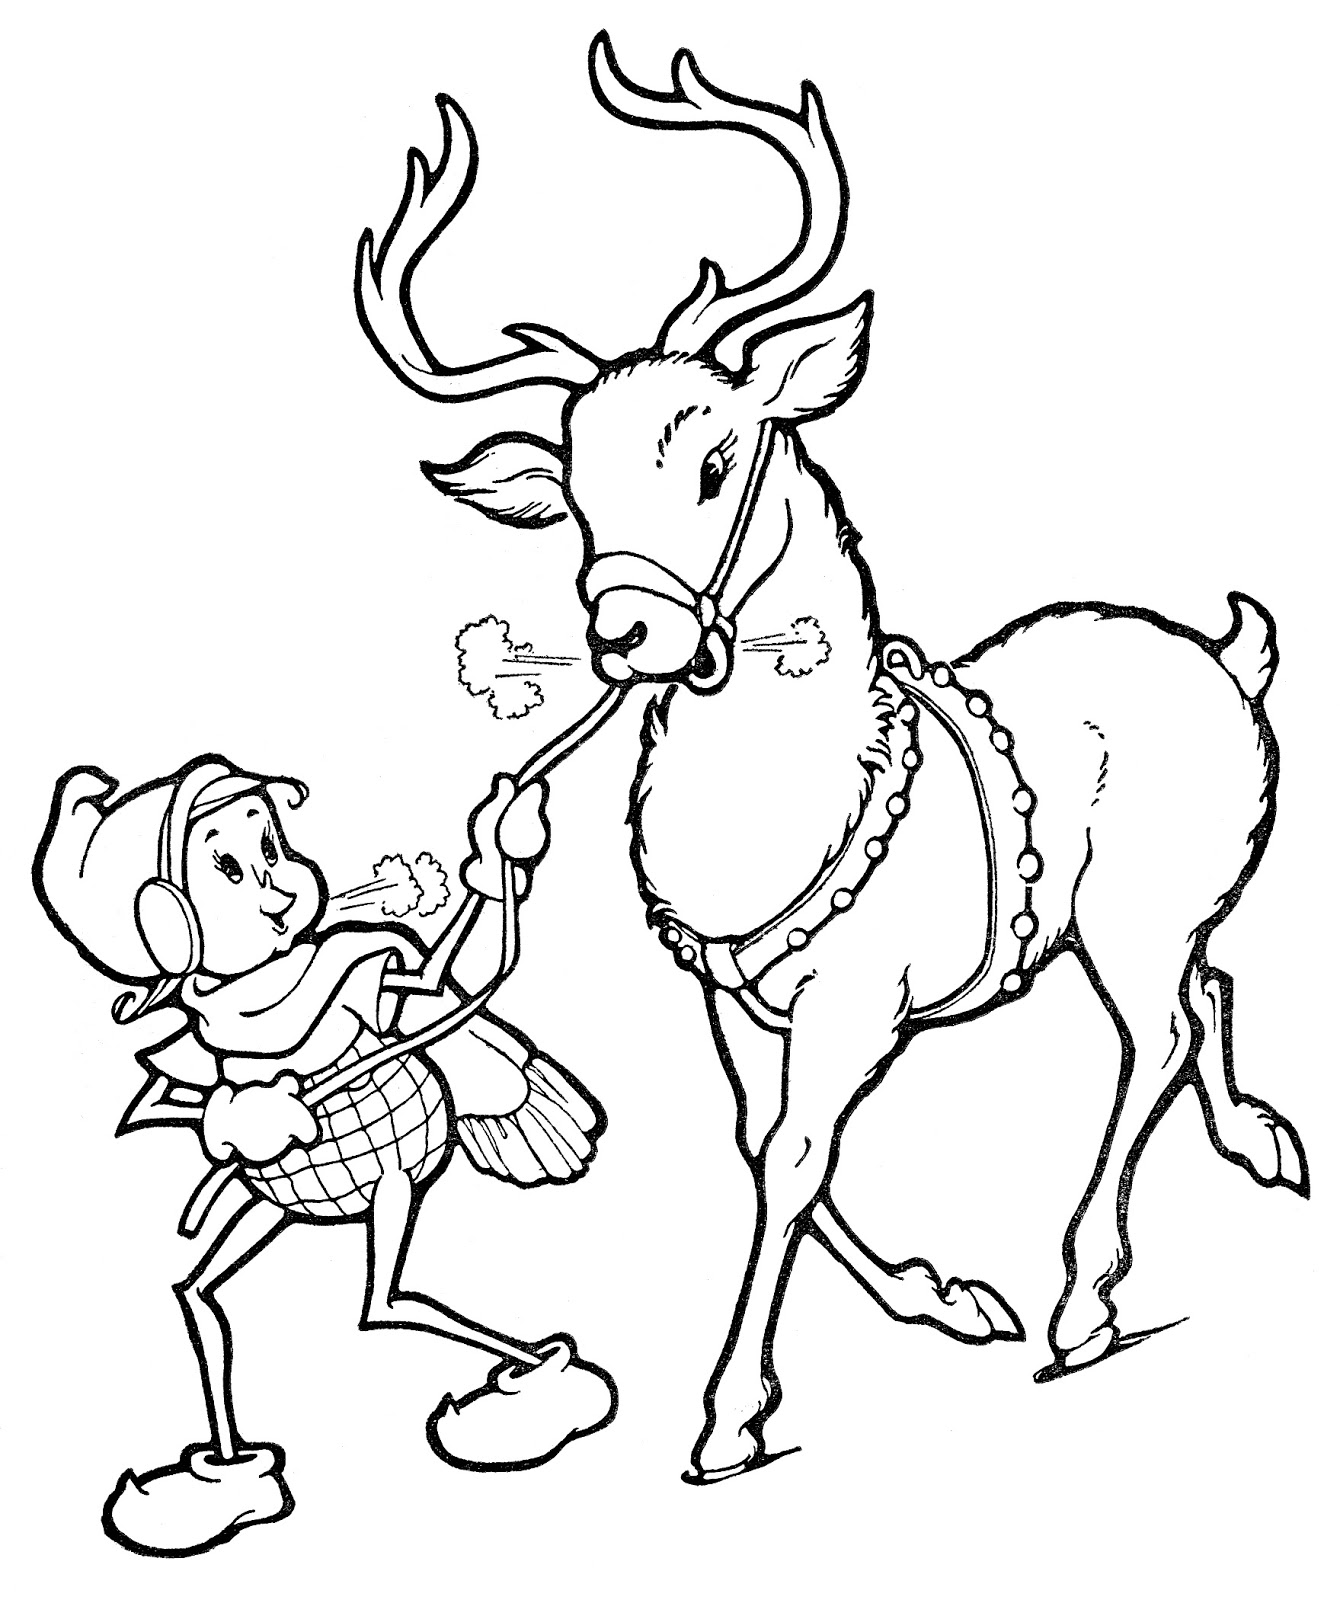 Elf  black and white christmas line art elf with reindeer the graphics fairy clipart